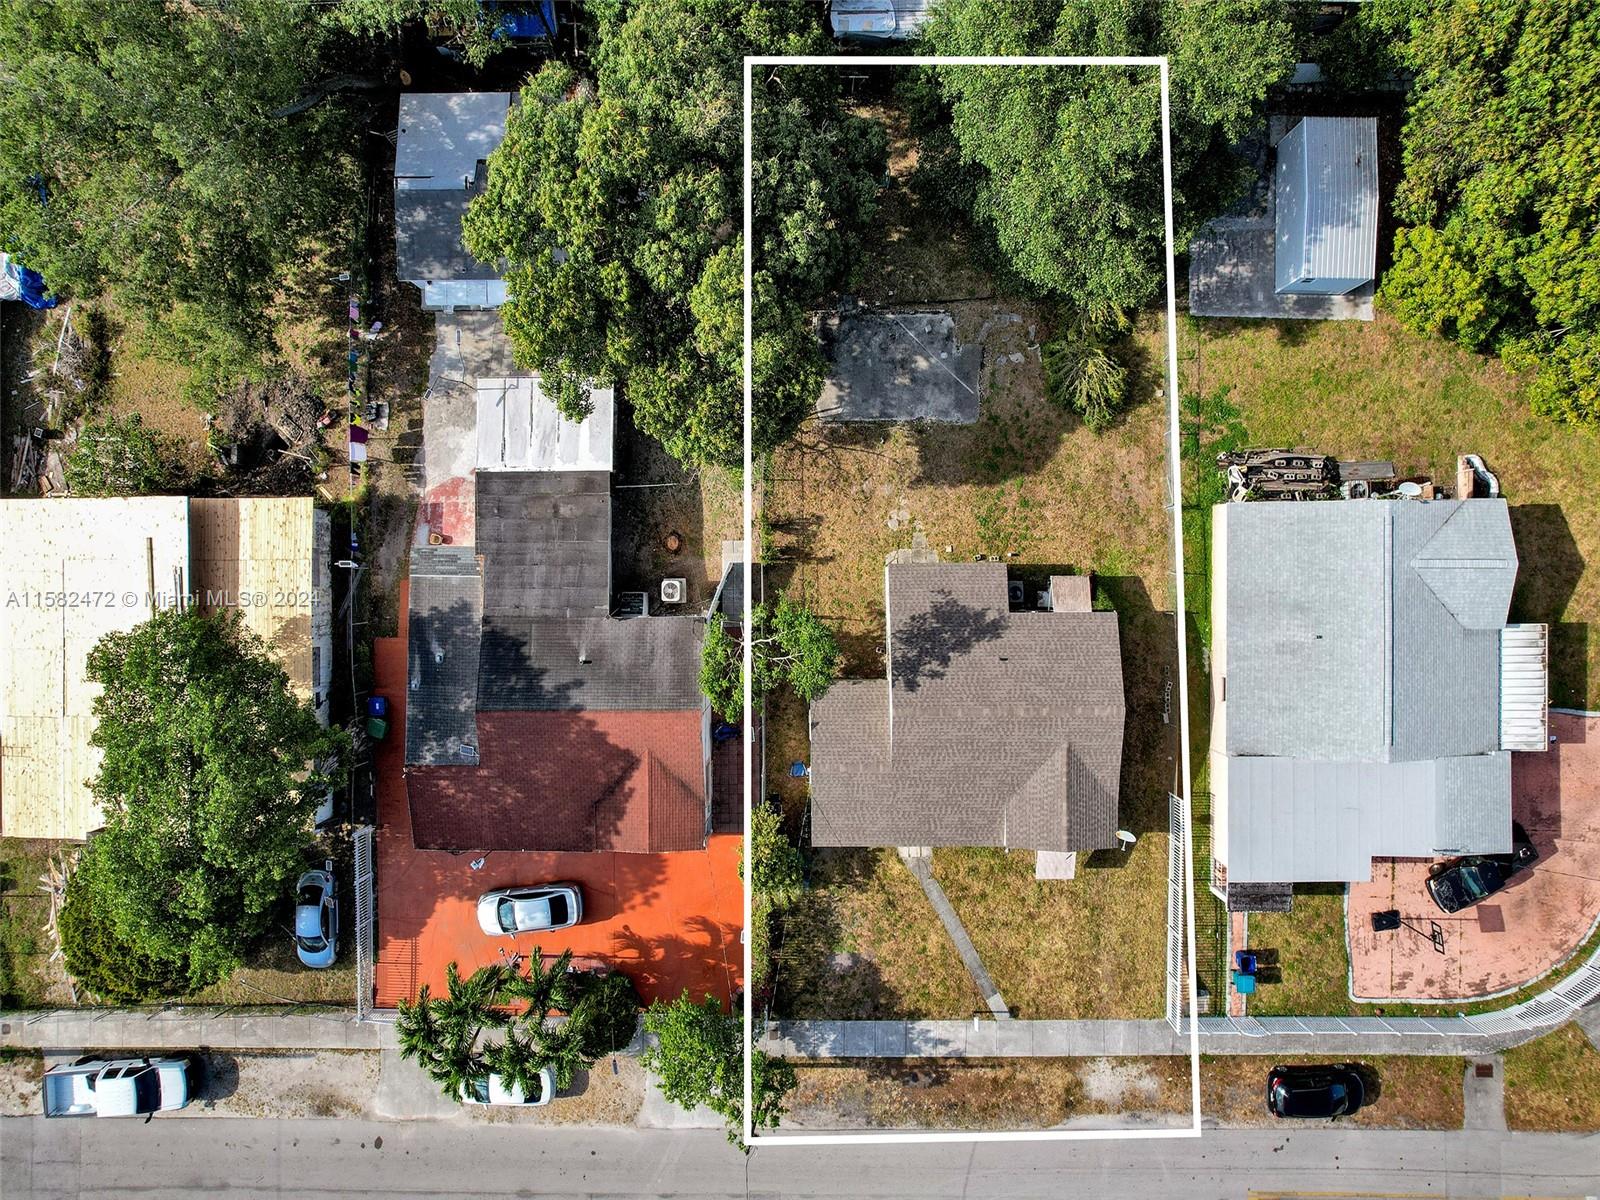 Exciting investment opportunity in West Little River! This property, being sold as-is, sits on a 7,500+ SQFT lot with room for a pool. With a new roof installed in 2021, unleash its development potential and capitalize on this prime location.